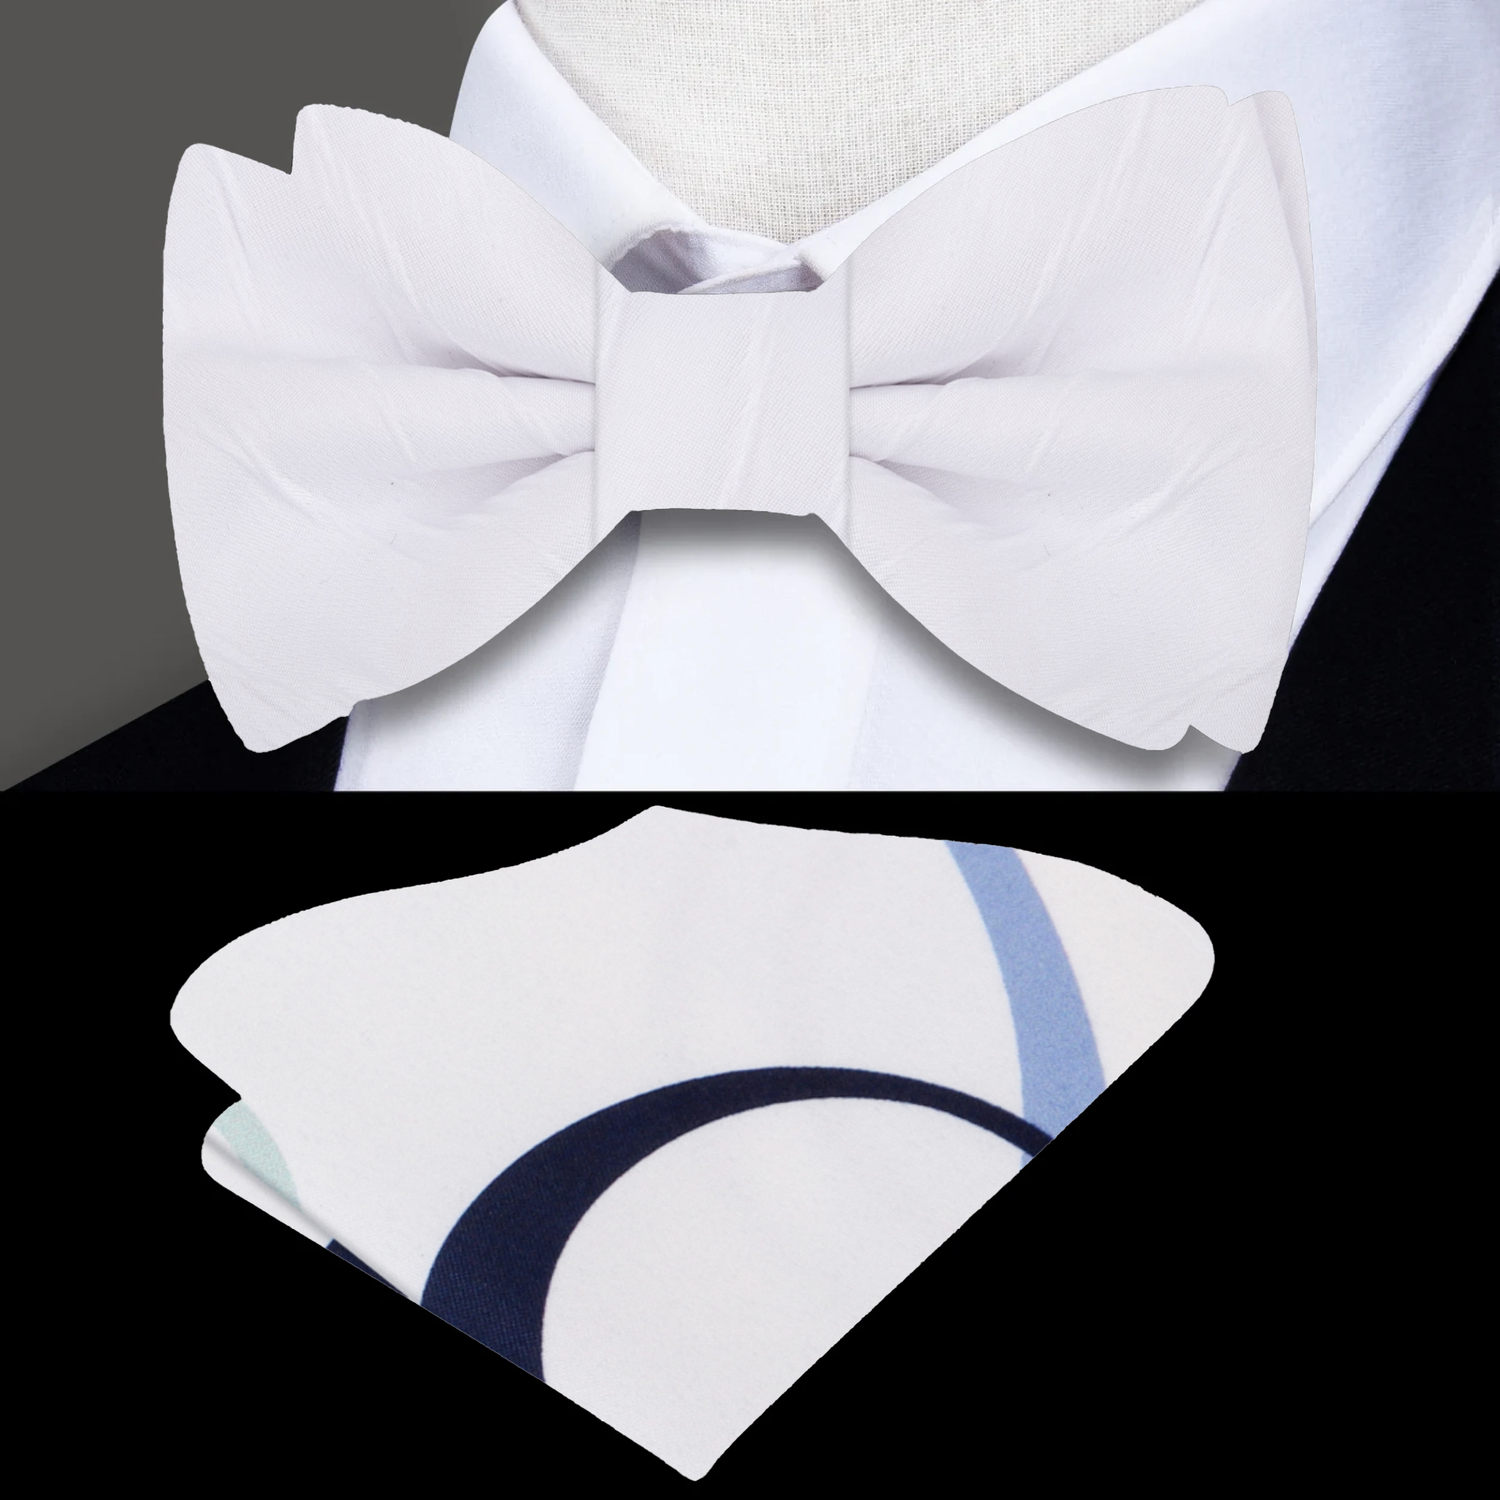 Soft White Texture Bow Tie and Accenting Pocket Square